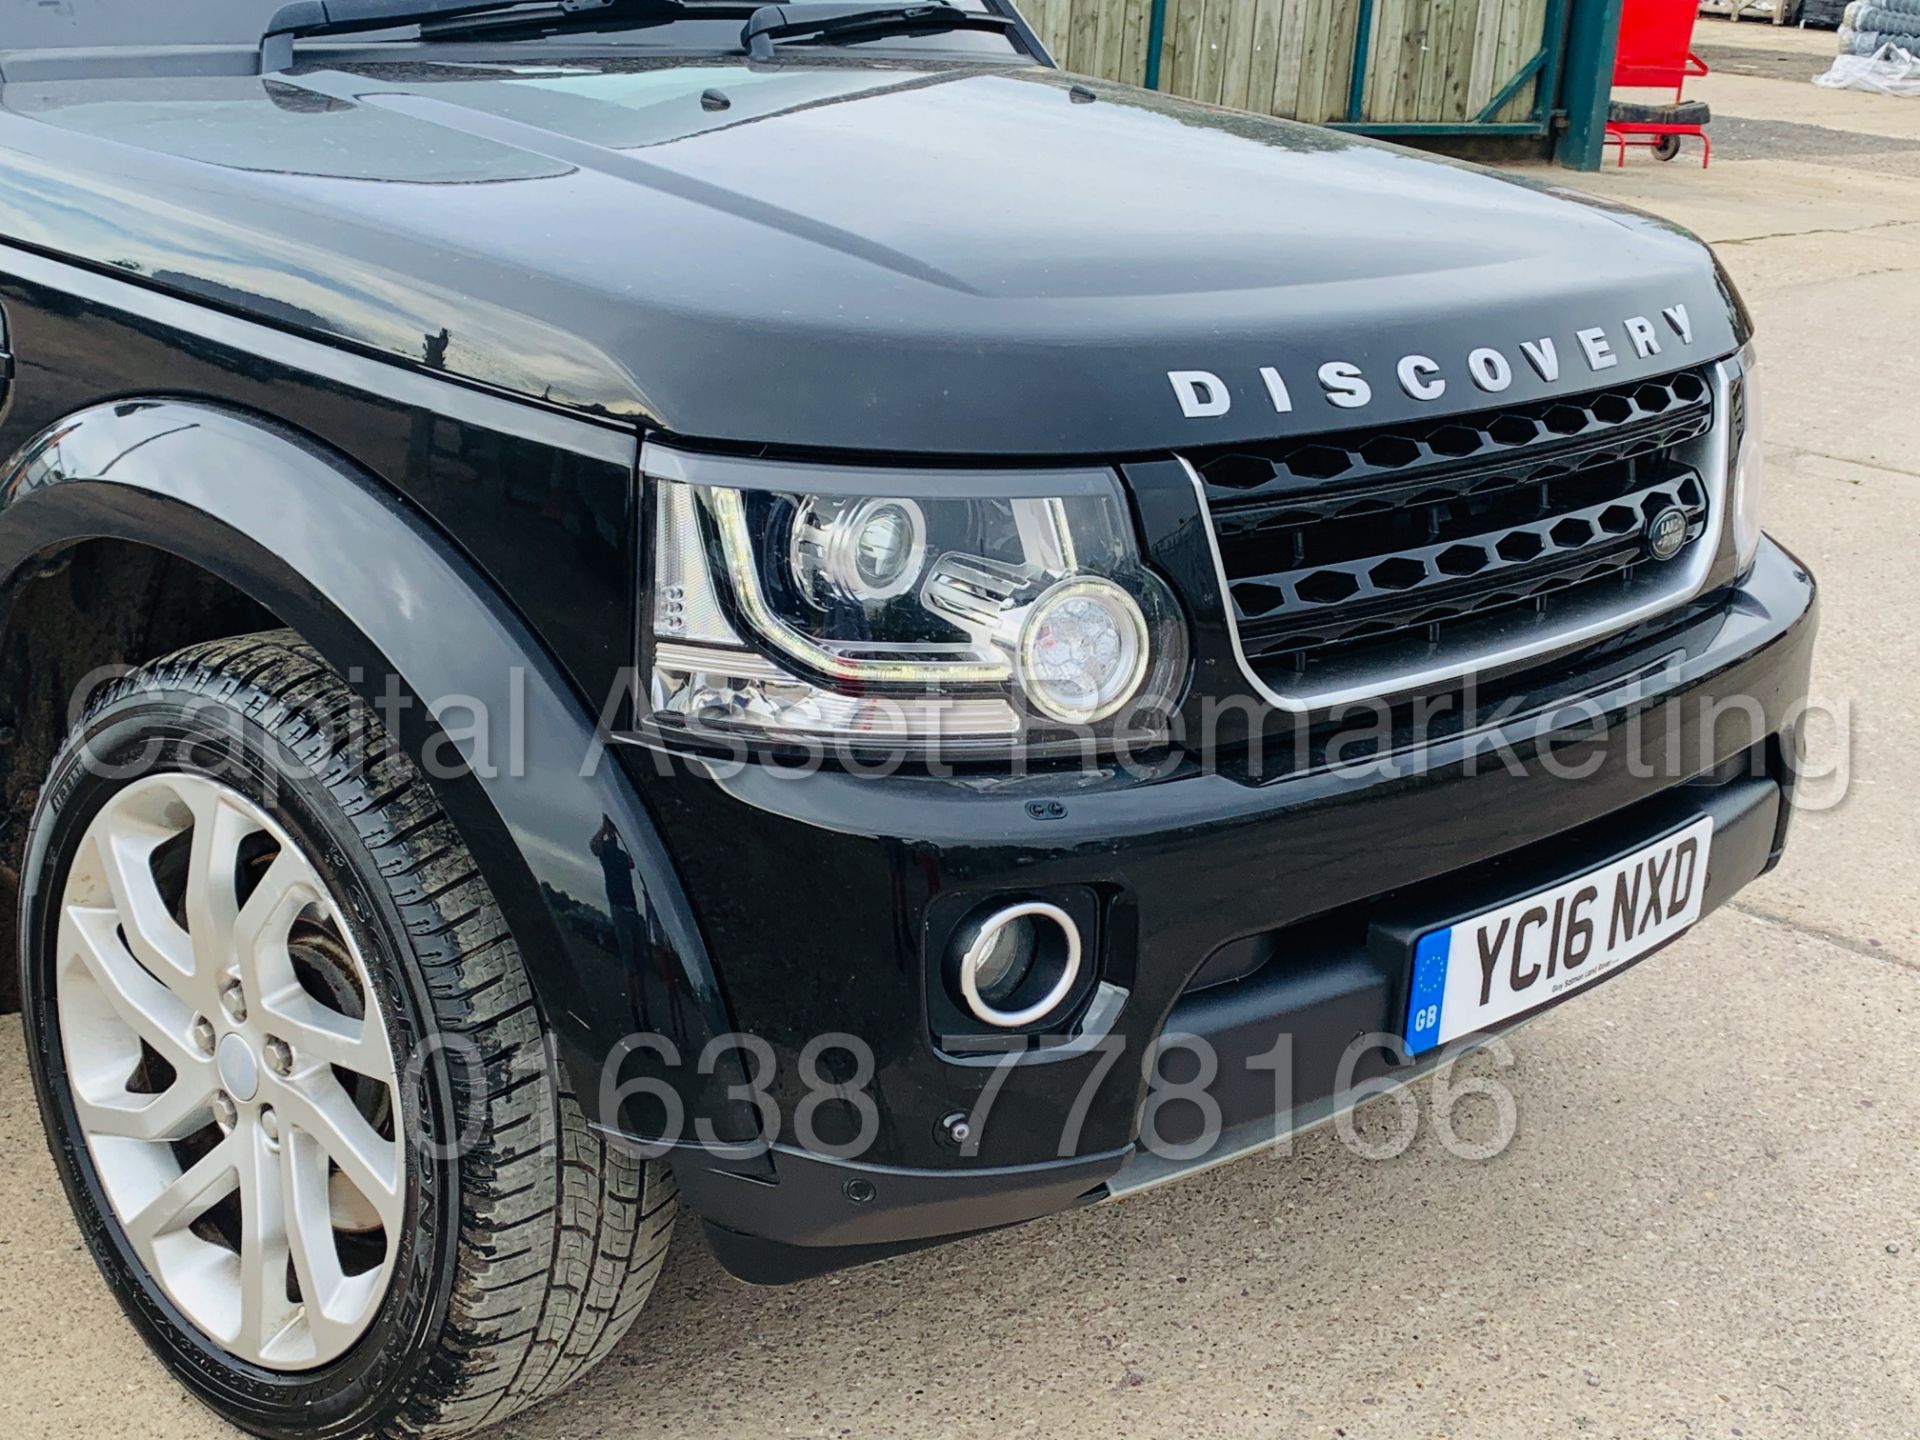 (On Sale) LAND ROVER DISCOVERY 4 *LANDMARK* 7 SEATER SUV (2016) '3.0 SDV6 - 8 SPEED AUTO' (1 OWNER) - Image 16 of 65